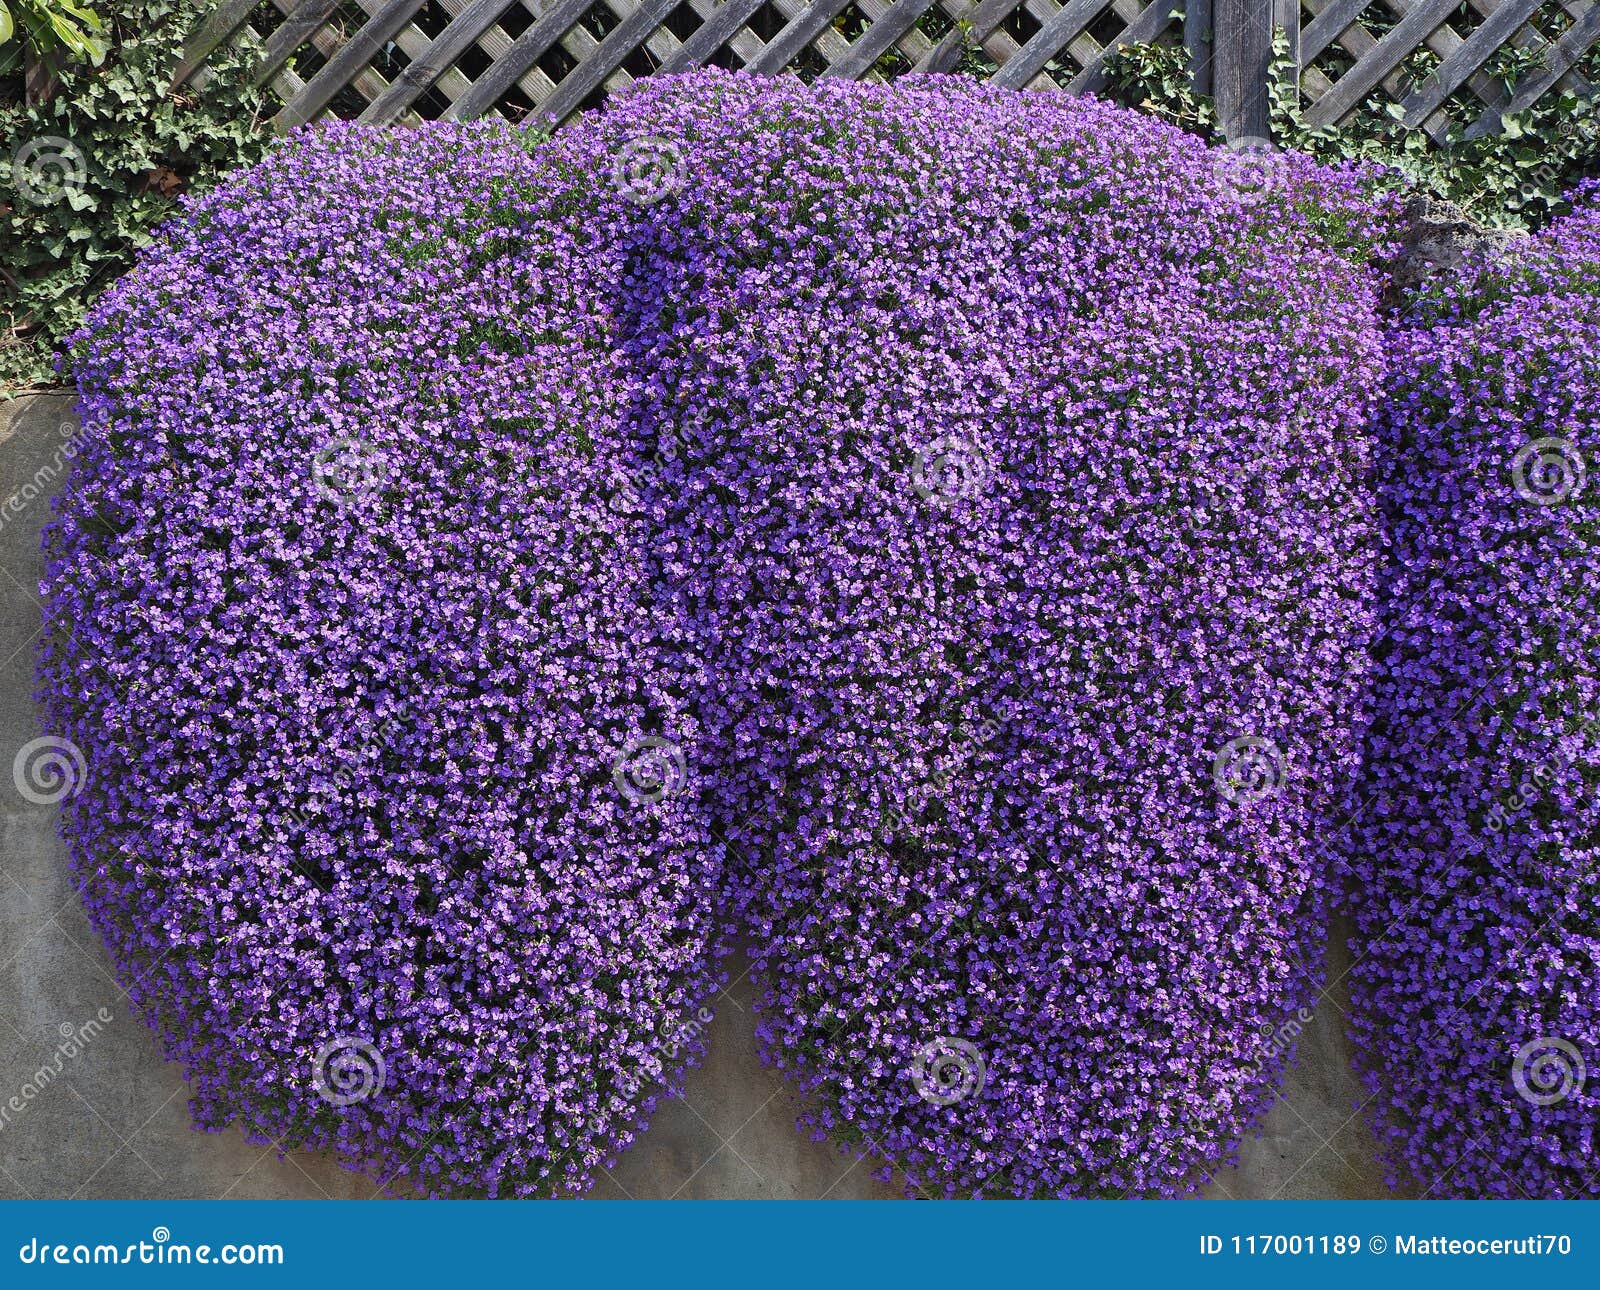 aubrieta or aubretia flowers in full bloom on a sunny spring day